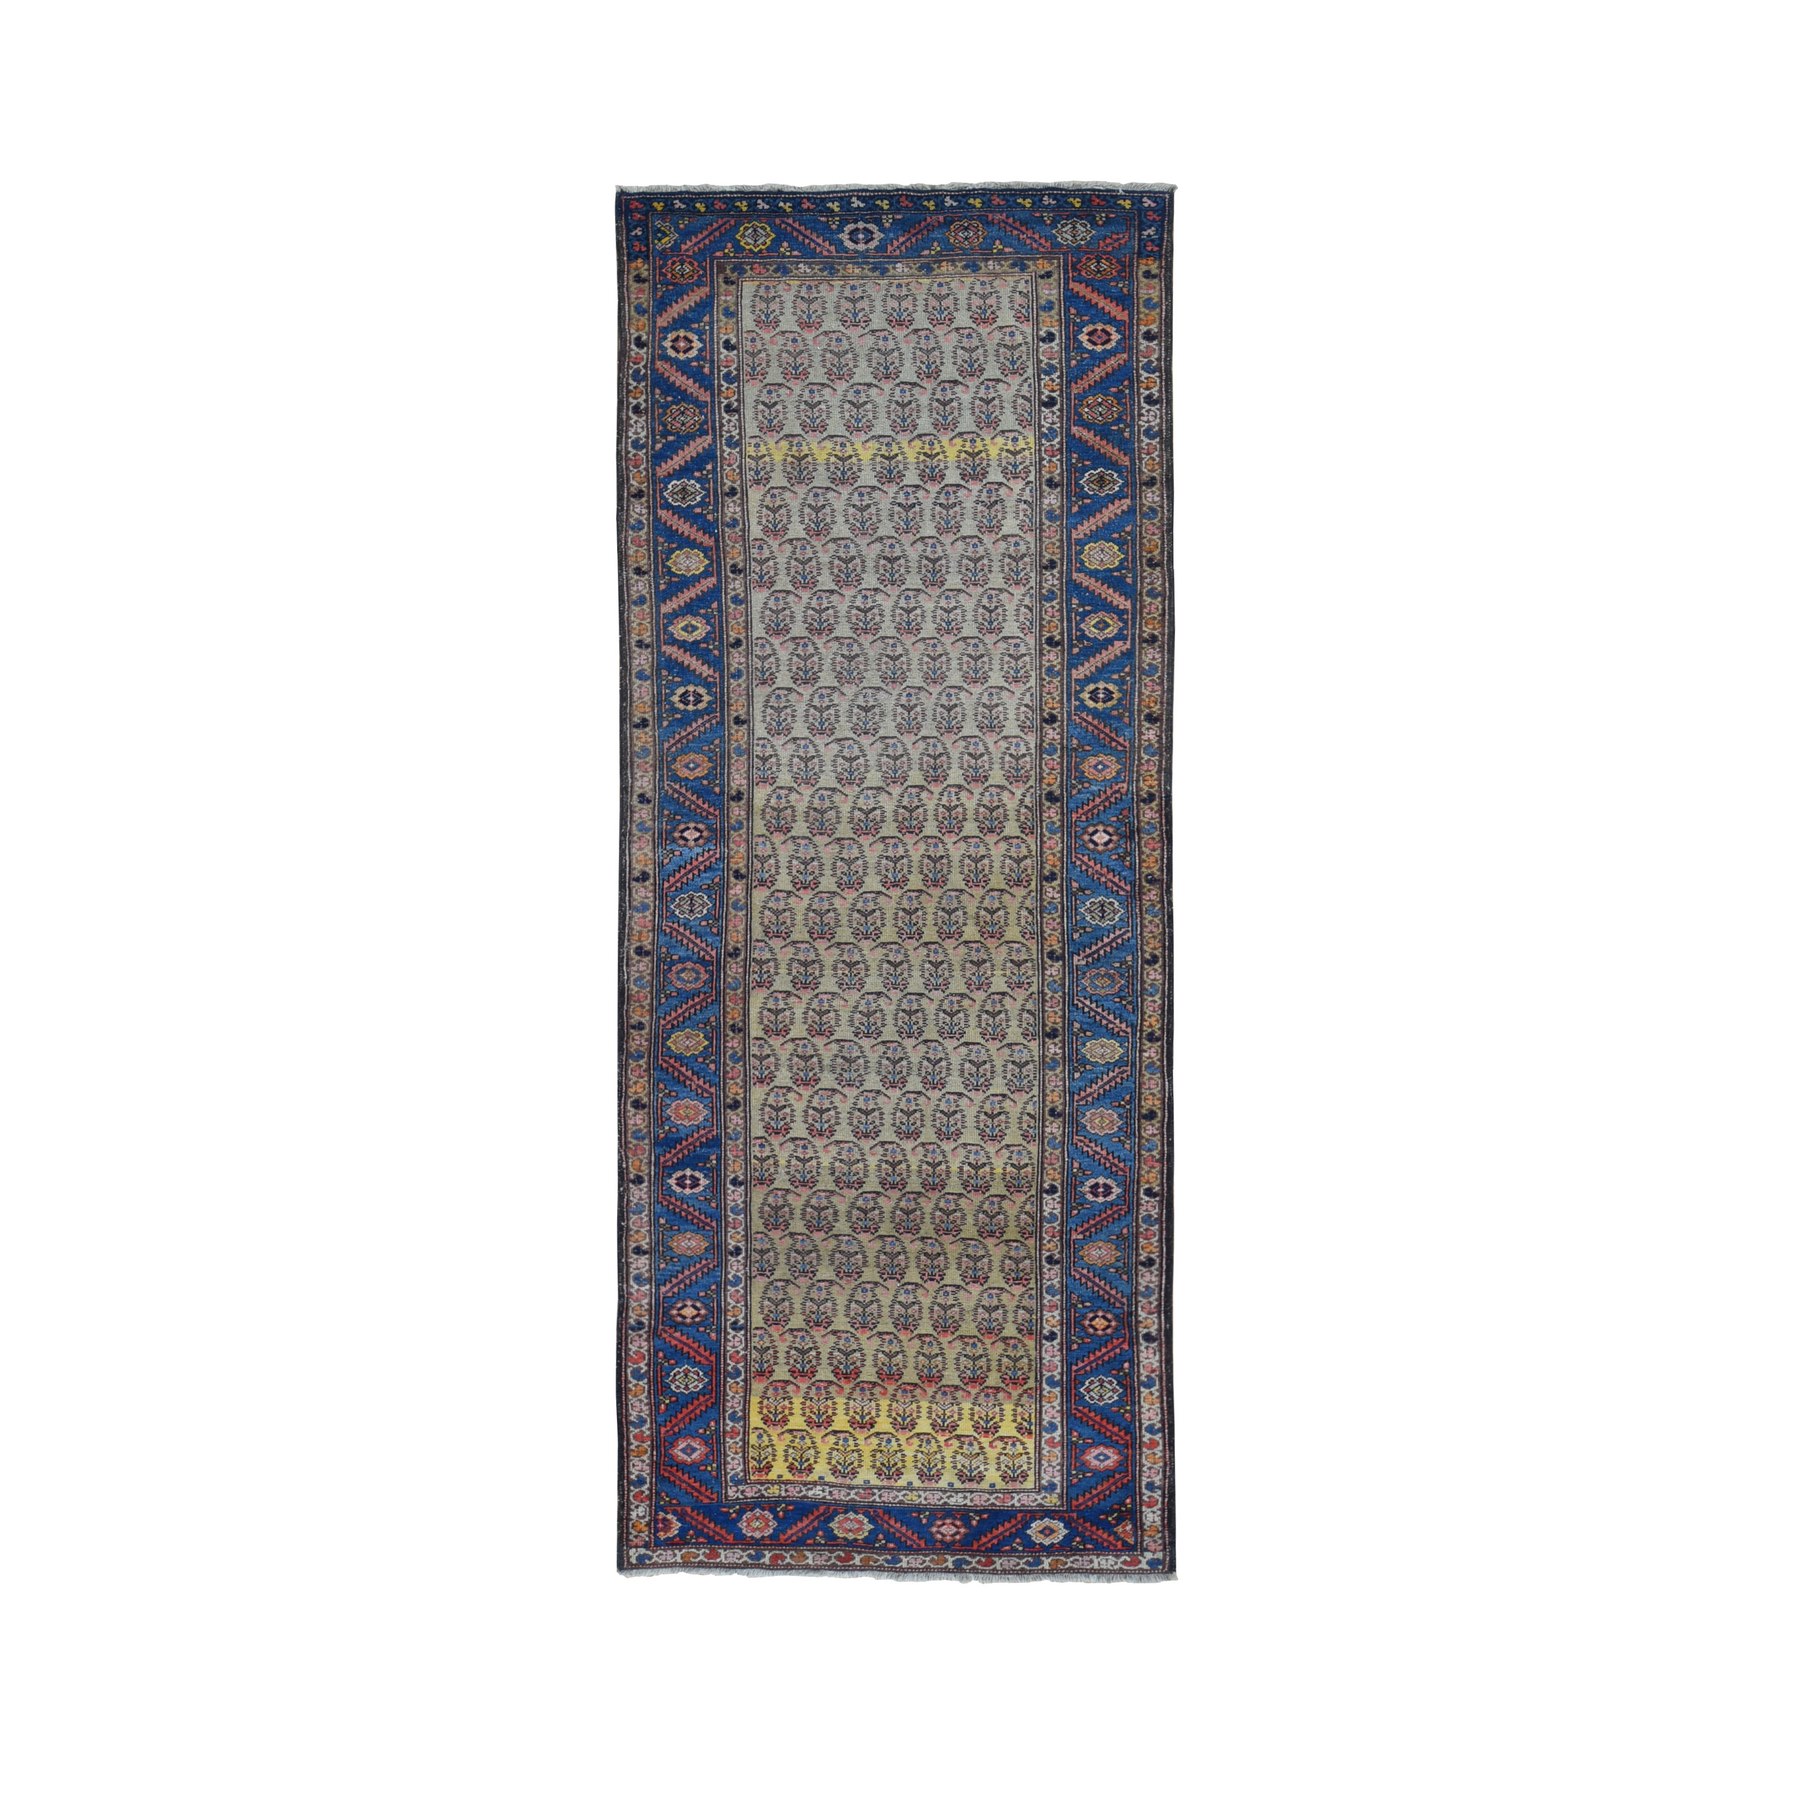 4'x10'3" Yellow, Antique Persian Bakshaish Abrash Paisley Design with Serrated Leaf Border, Excellent Condition Pure Wool, Clean Hand Woven, Wide Runner Oriental Rug 